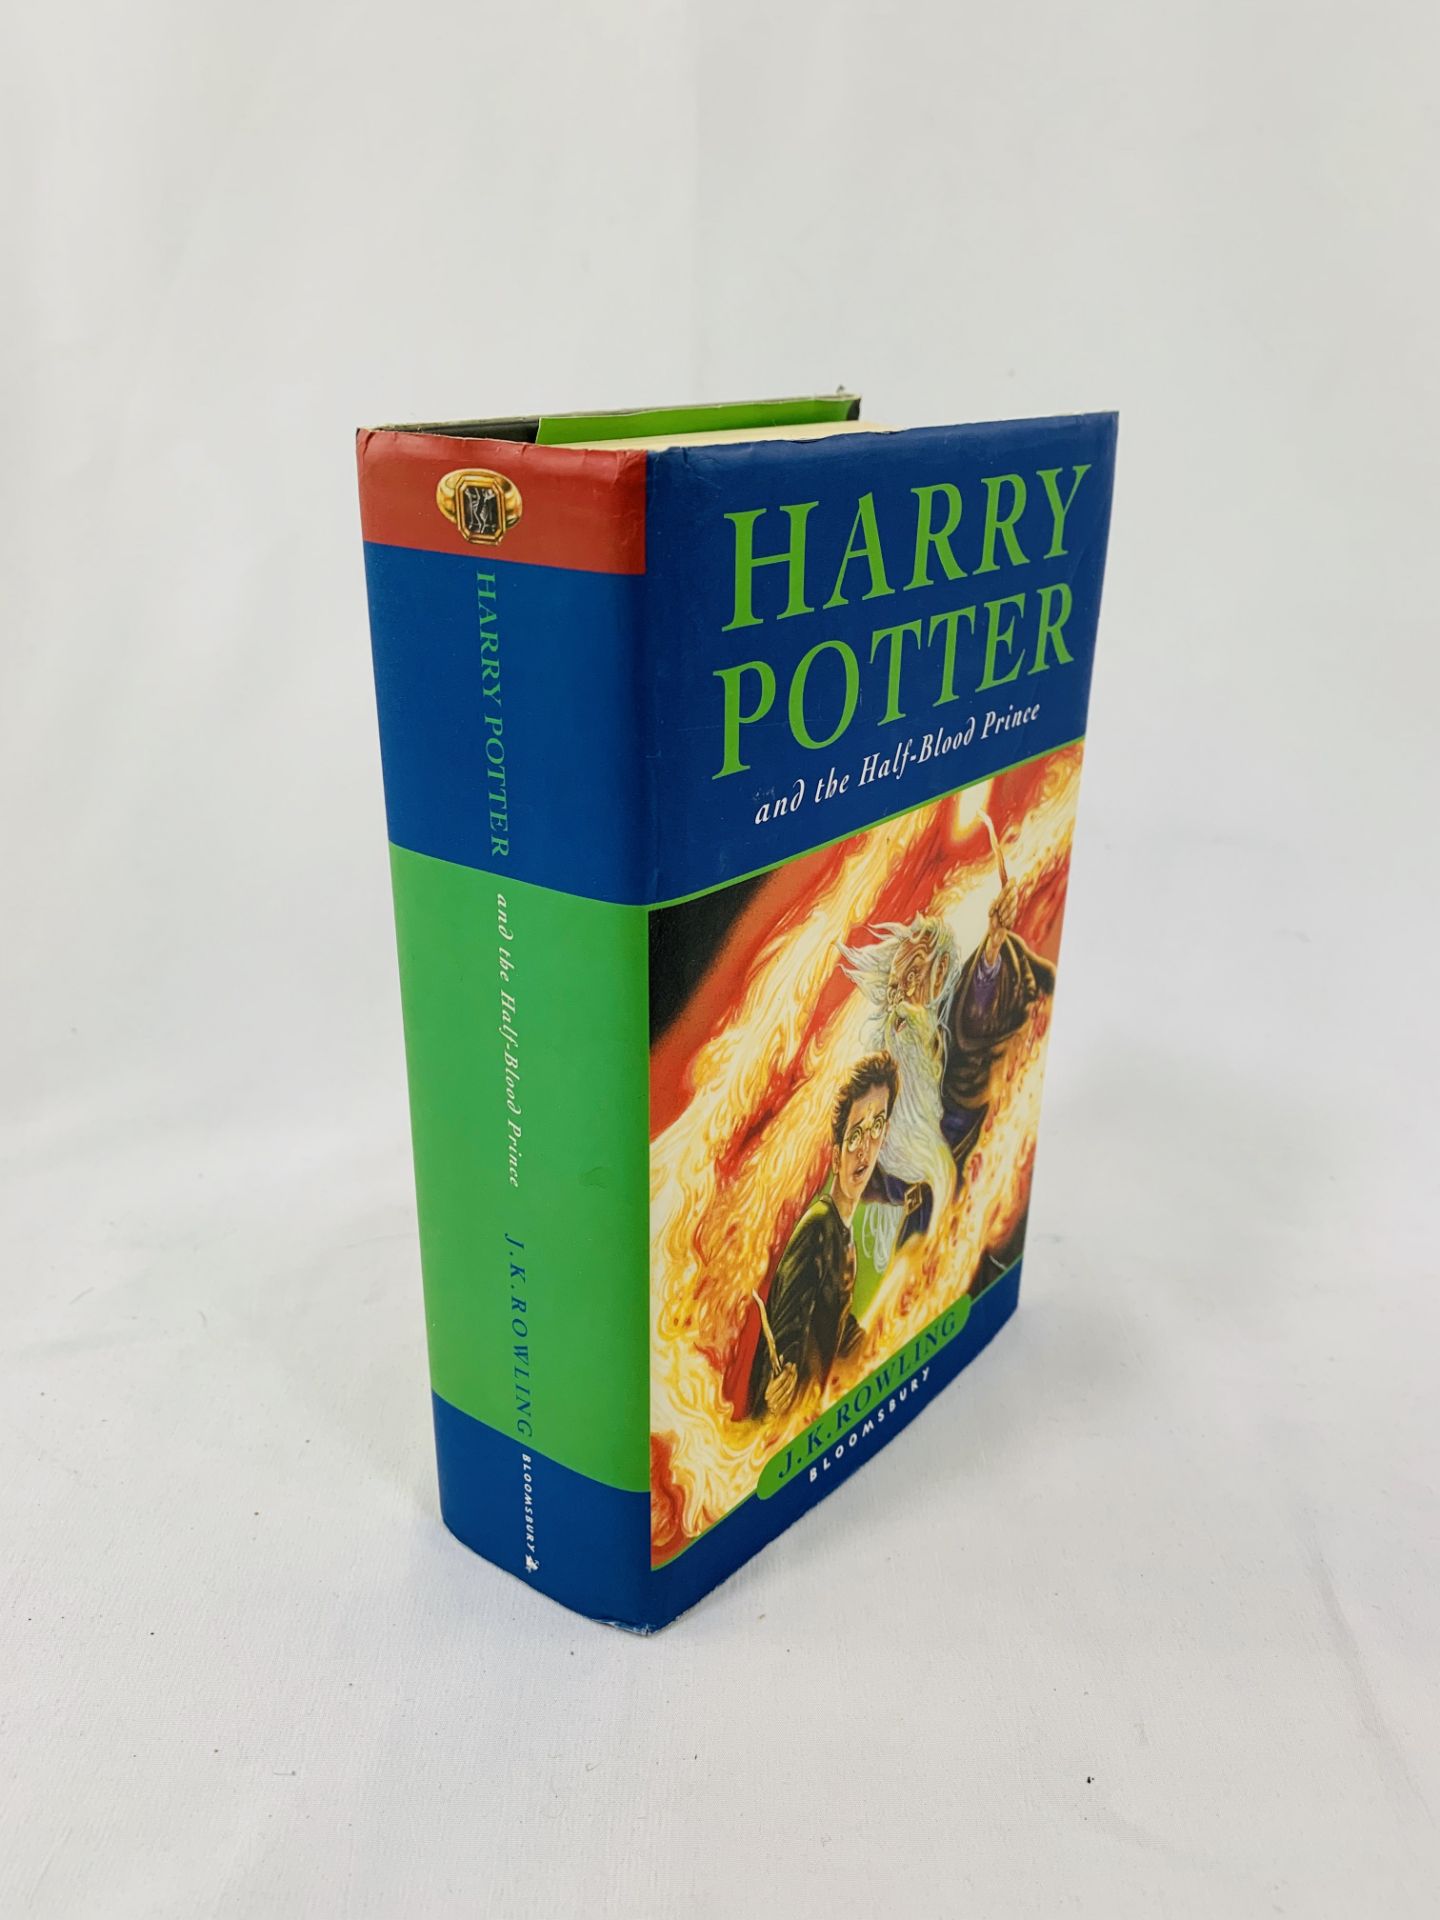 "Harry Potter and the Half Blood Prince", first edition.